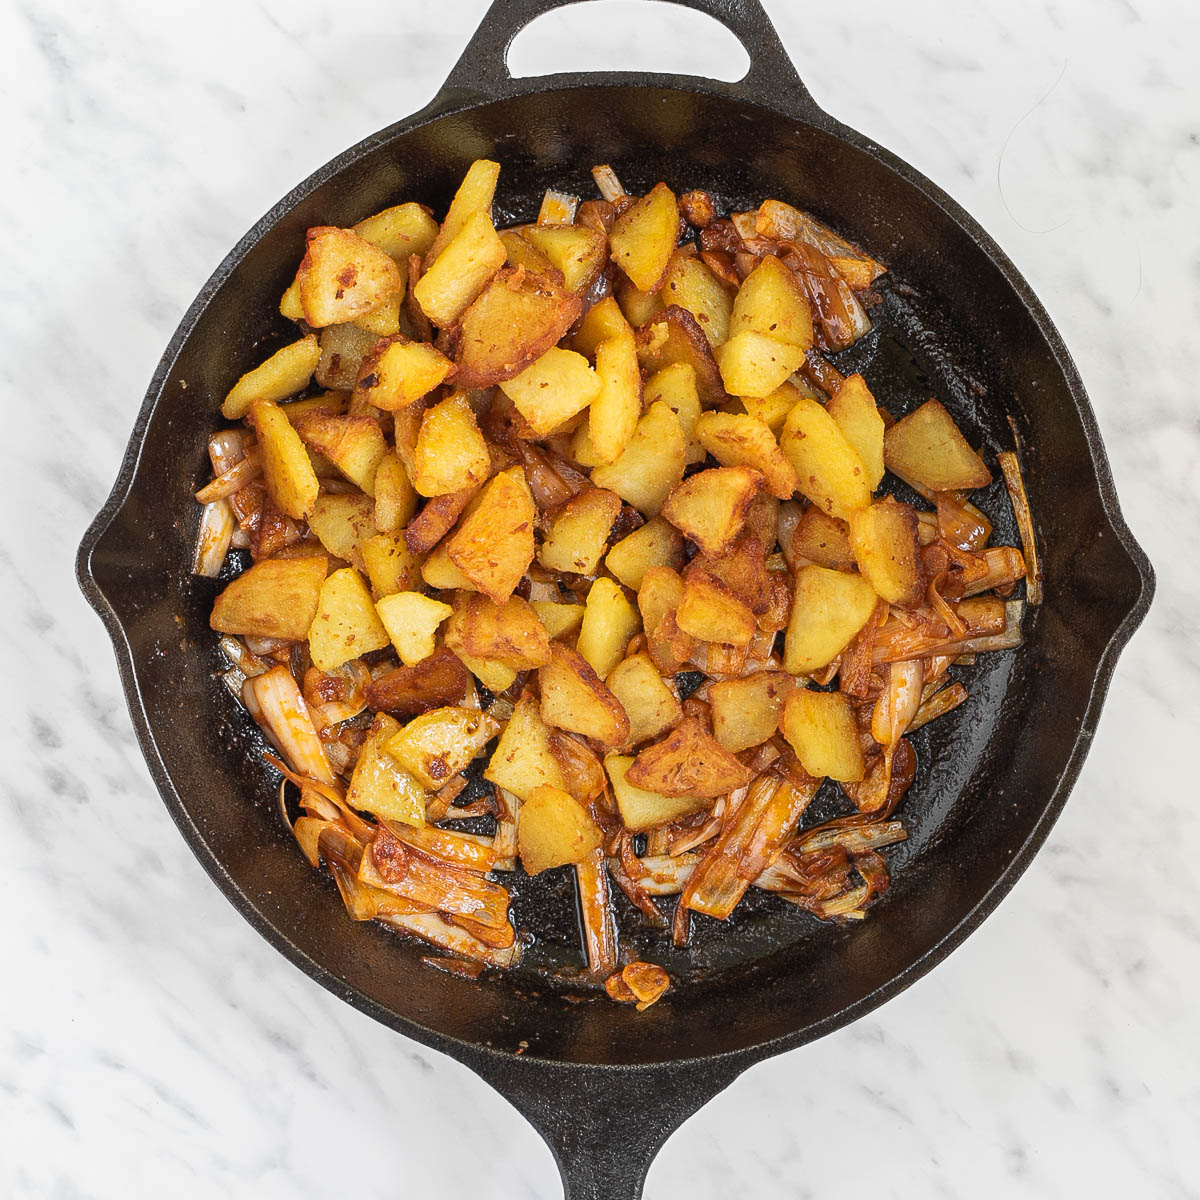 Skillet with potatoes and caramelized onion slices.